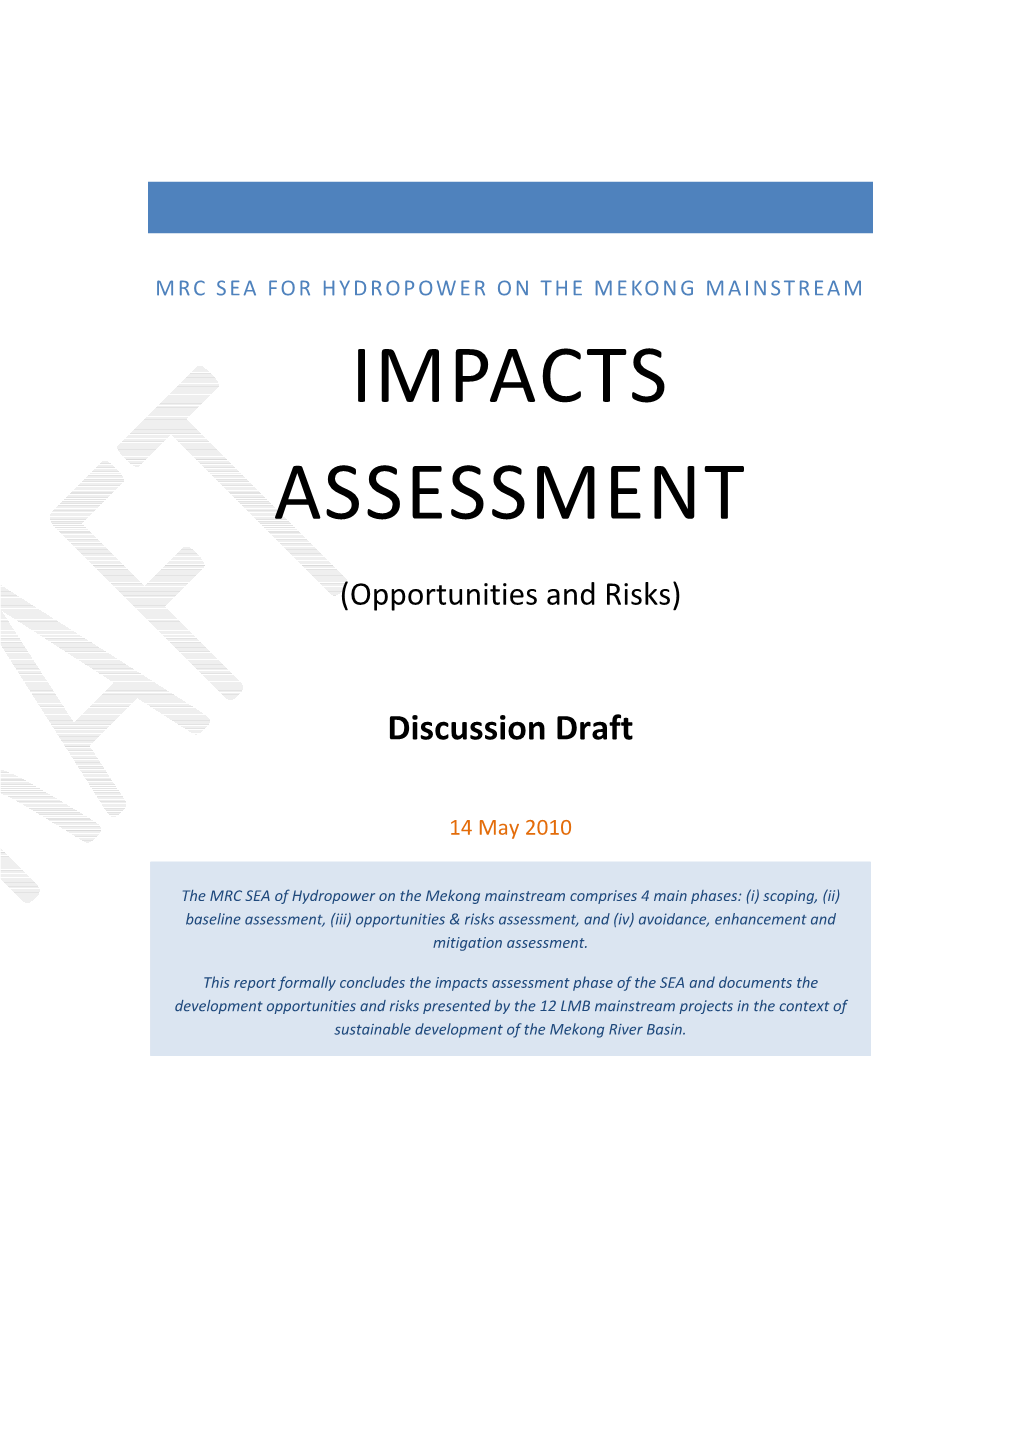 Impacts Assessment